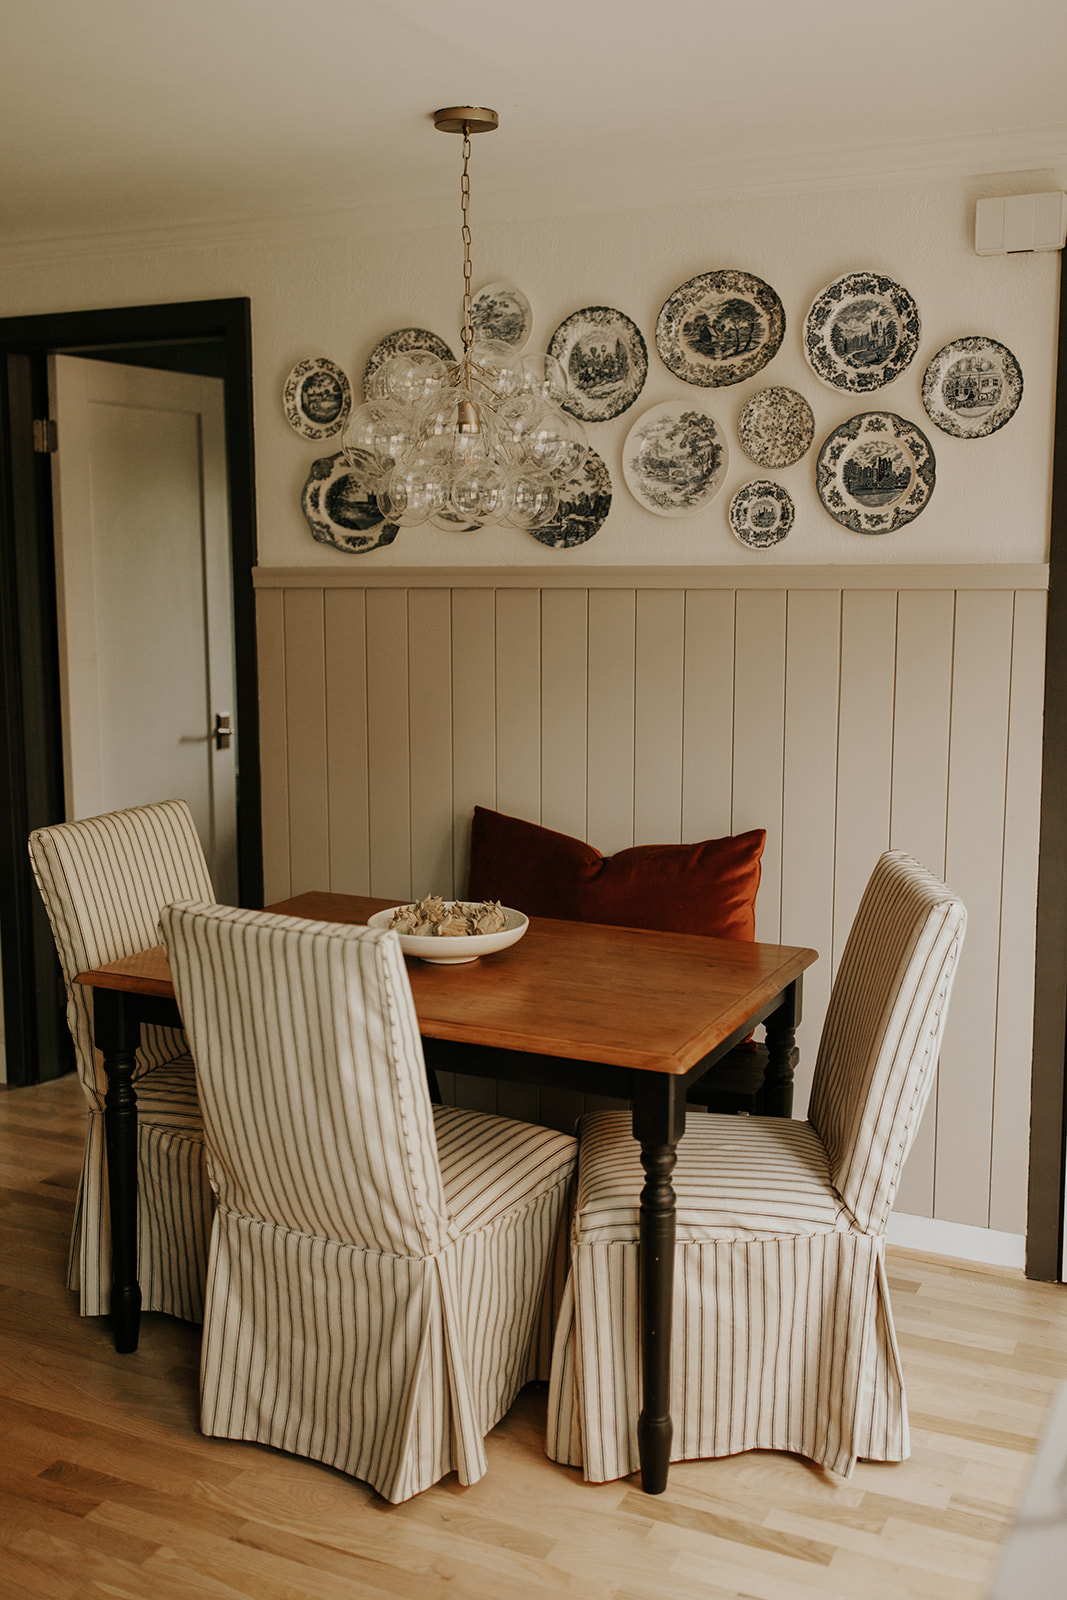 A dining room table sits on hardwood floors, with chairs on all sides, each of which has a striped slipcover on. The wall behind the table has partial shiplap and blue nordic plates hanging.